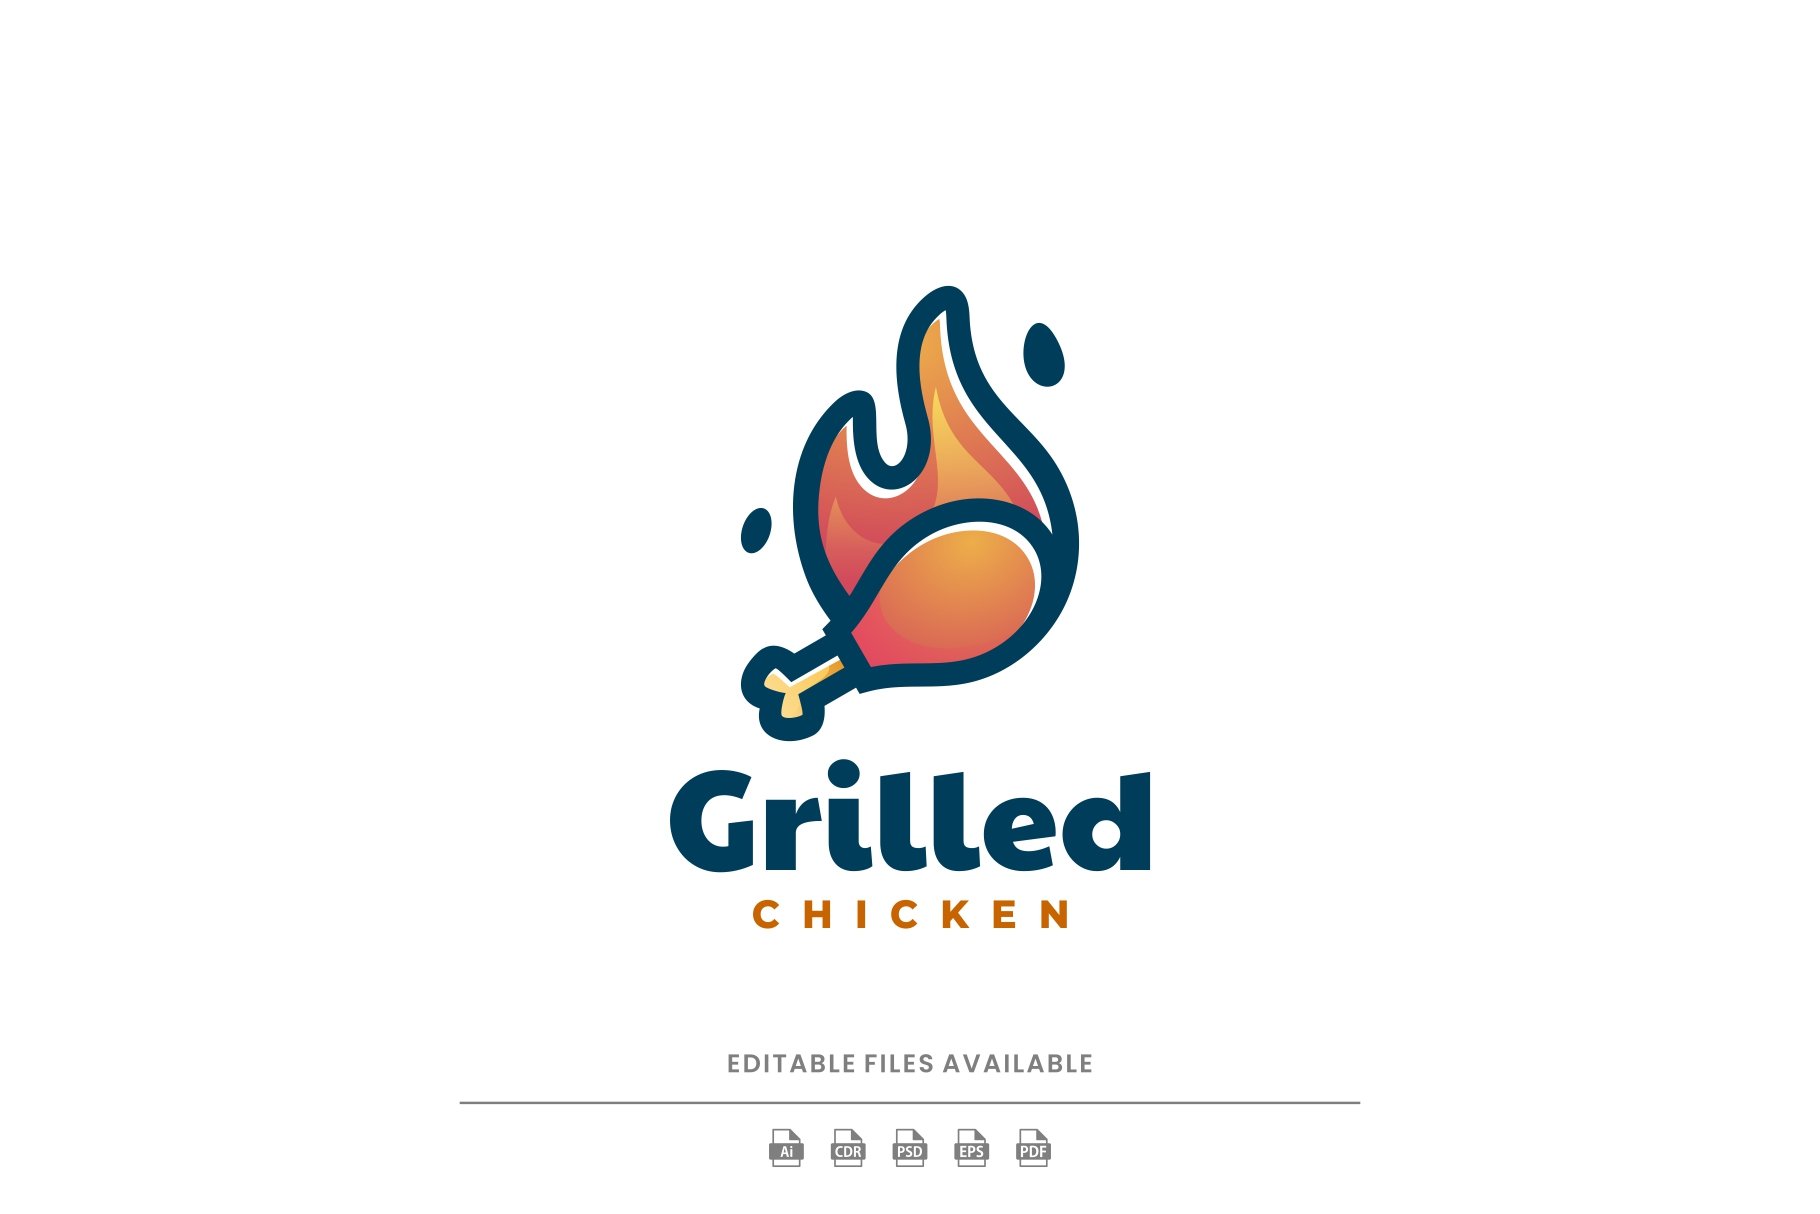 Grilled Chicken Mascot Logo cover image.